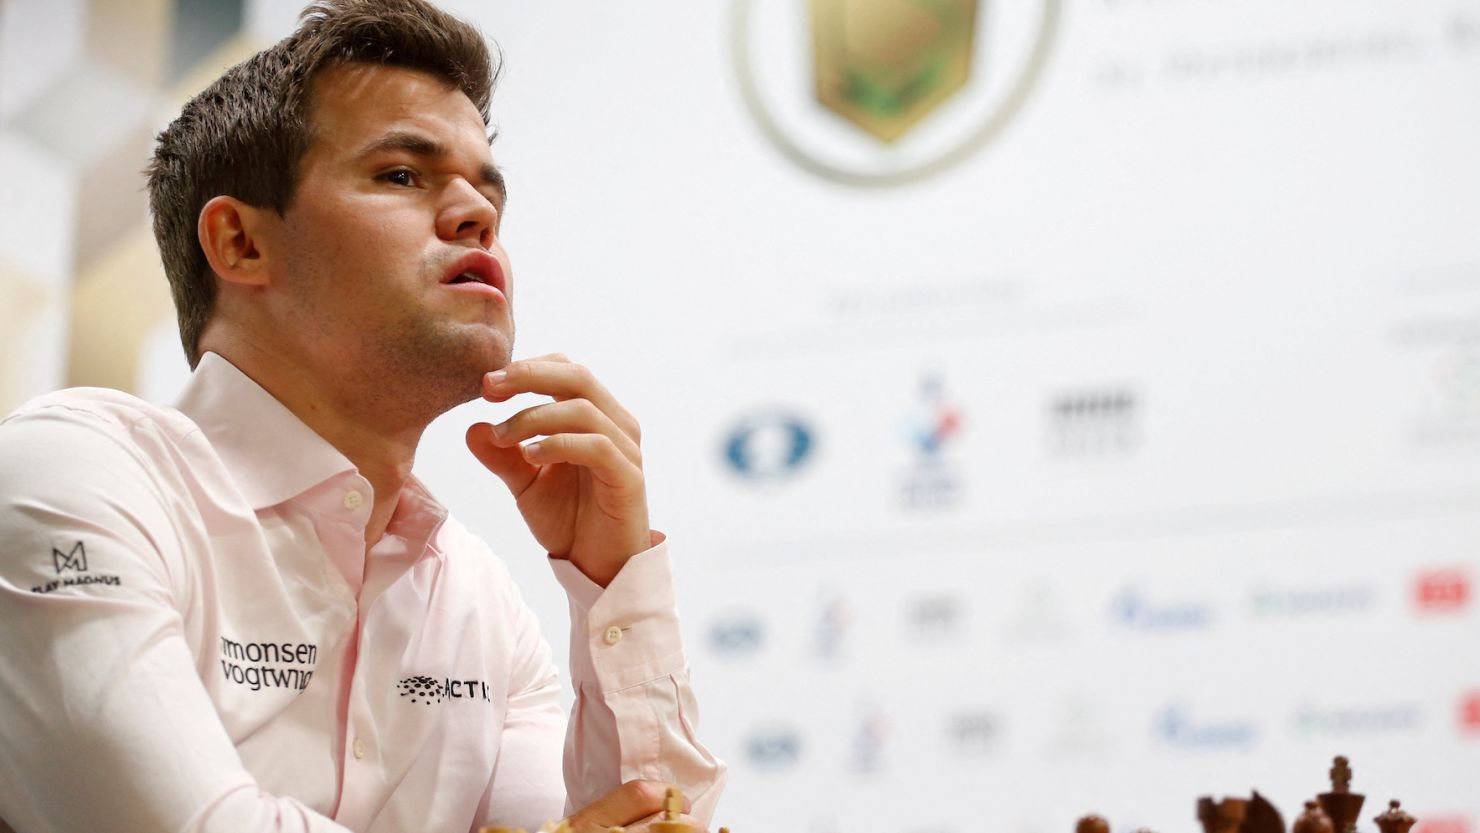 Tour Finals 2022: Magnus Carlsen Takes Sole Lead After Seventh Straight Win  - News18